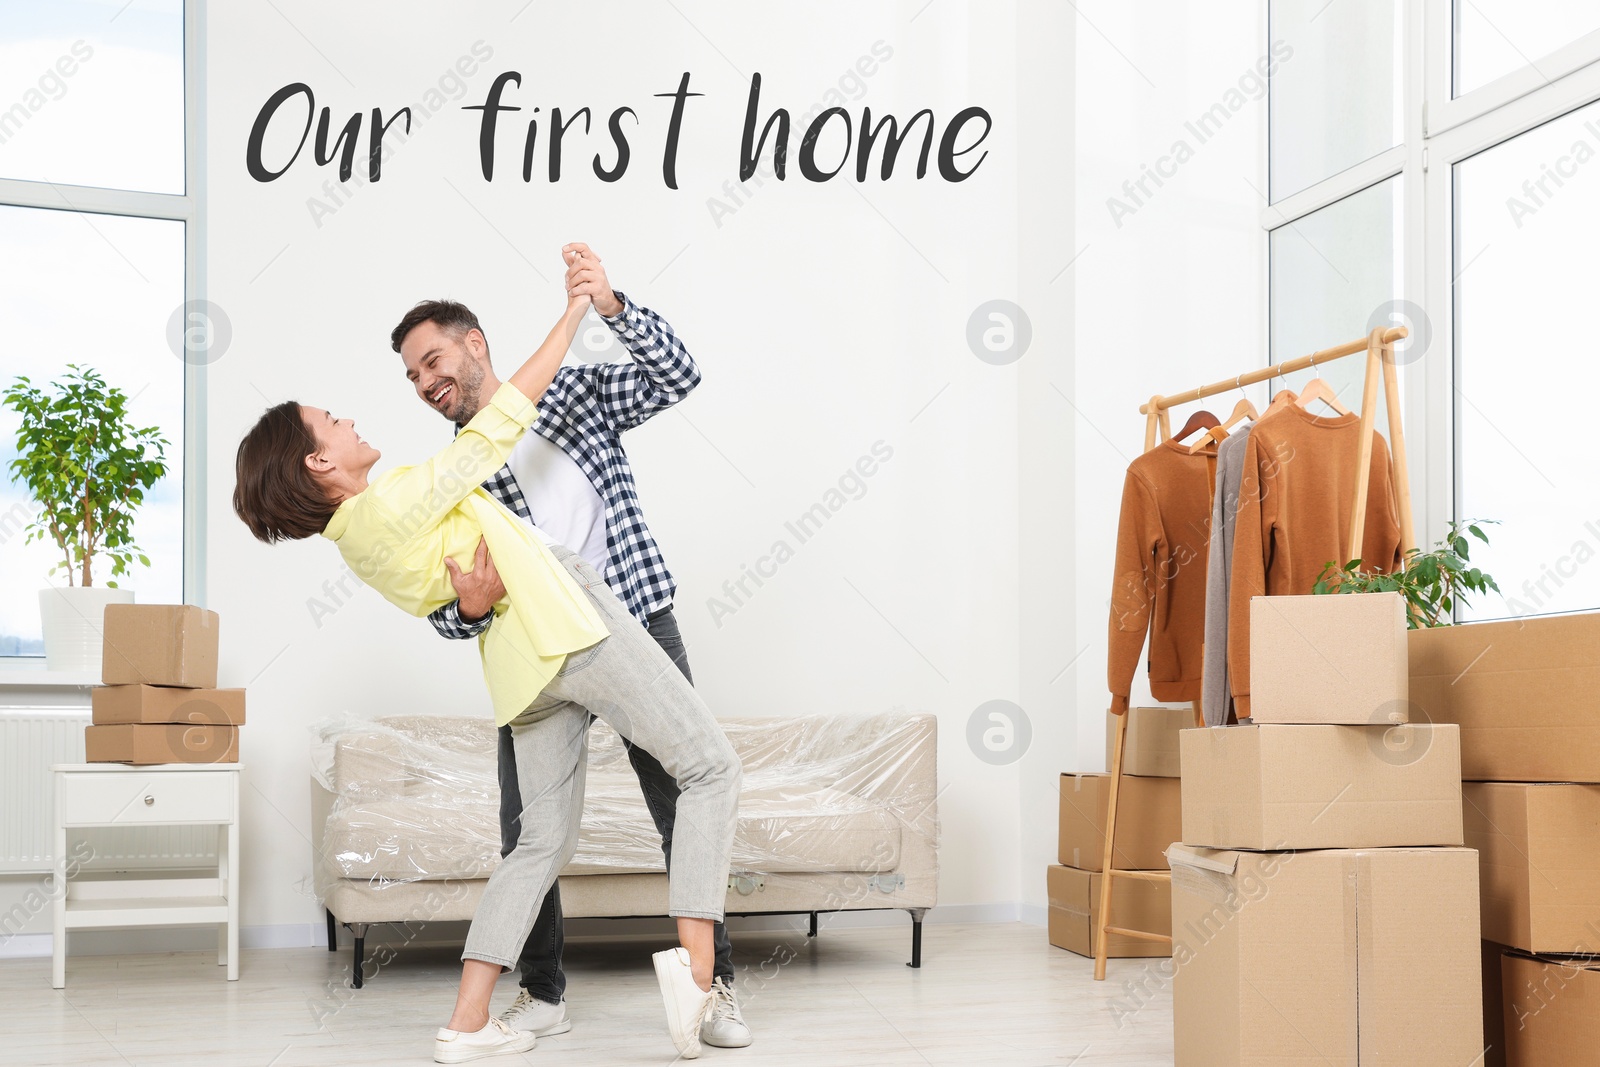 Image of First-time buyer. Happy couple dancing in their new apartment. Phrase Our First Home